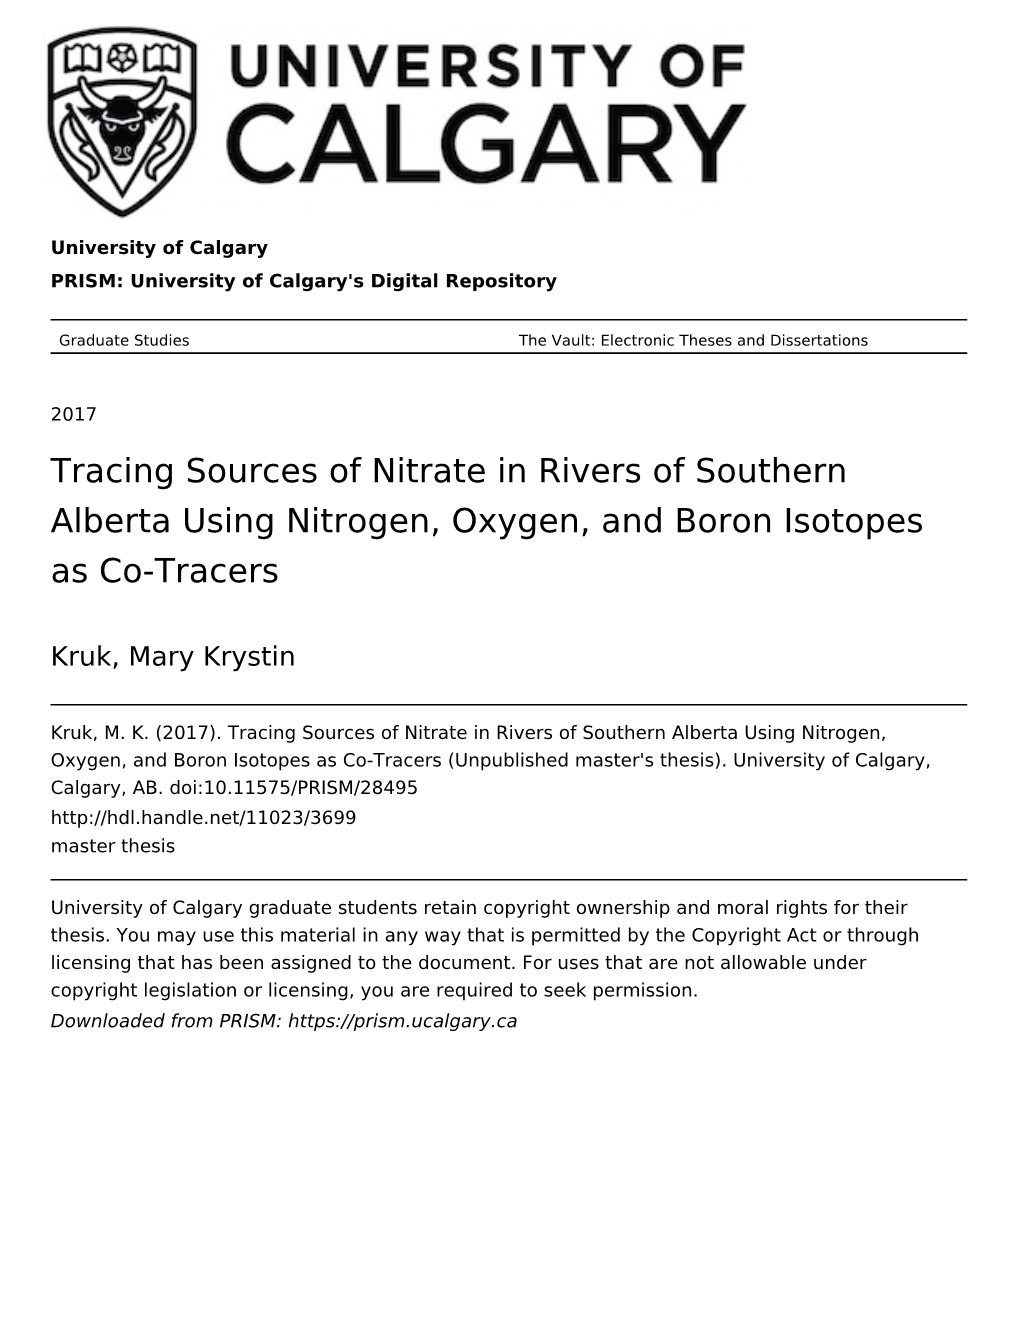 Tracing Sources of Nitrate in Rivers of Southern Alberta Using Nitrogen, Oxygen, and Boron Isotopes As Co-Tracers